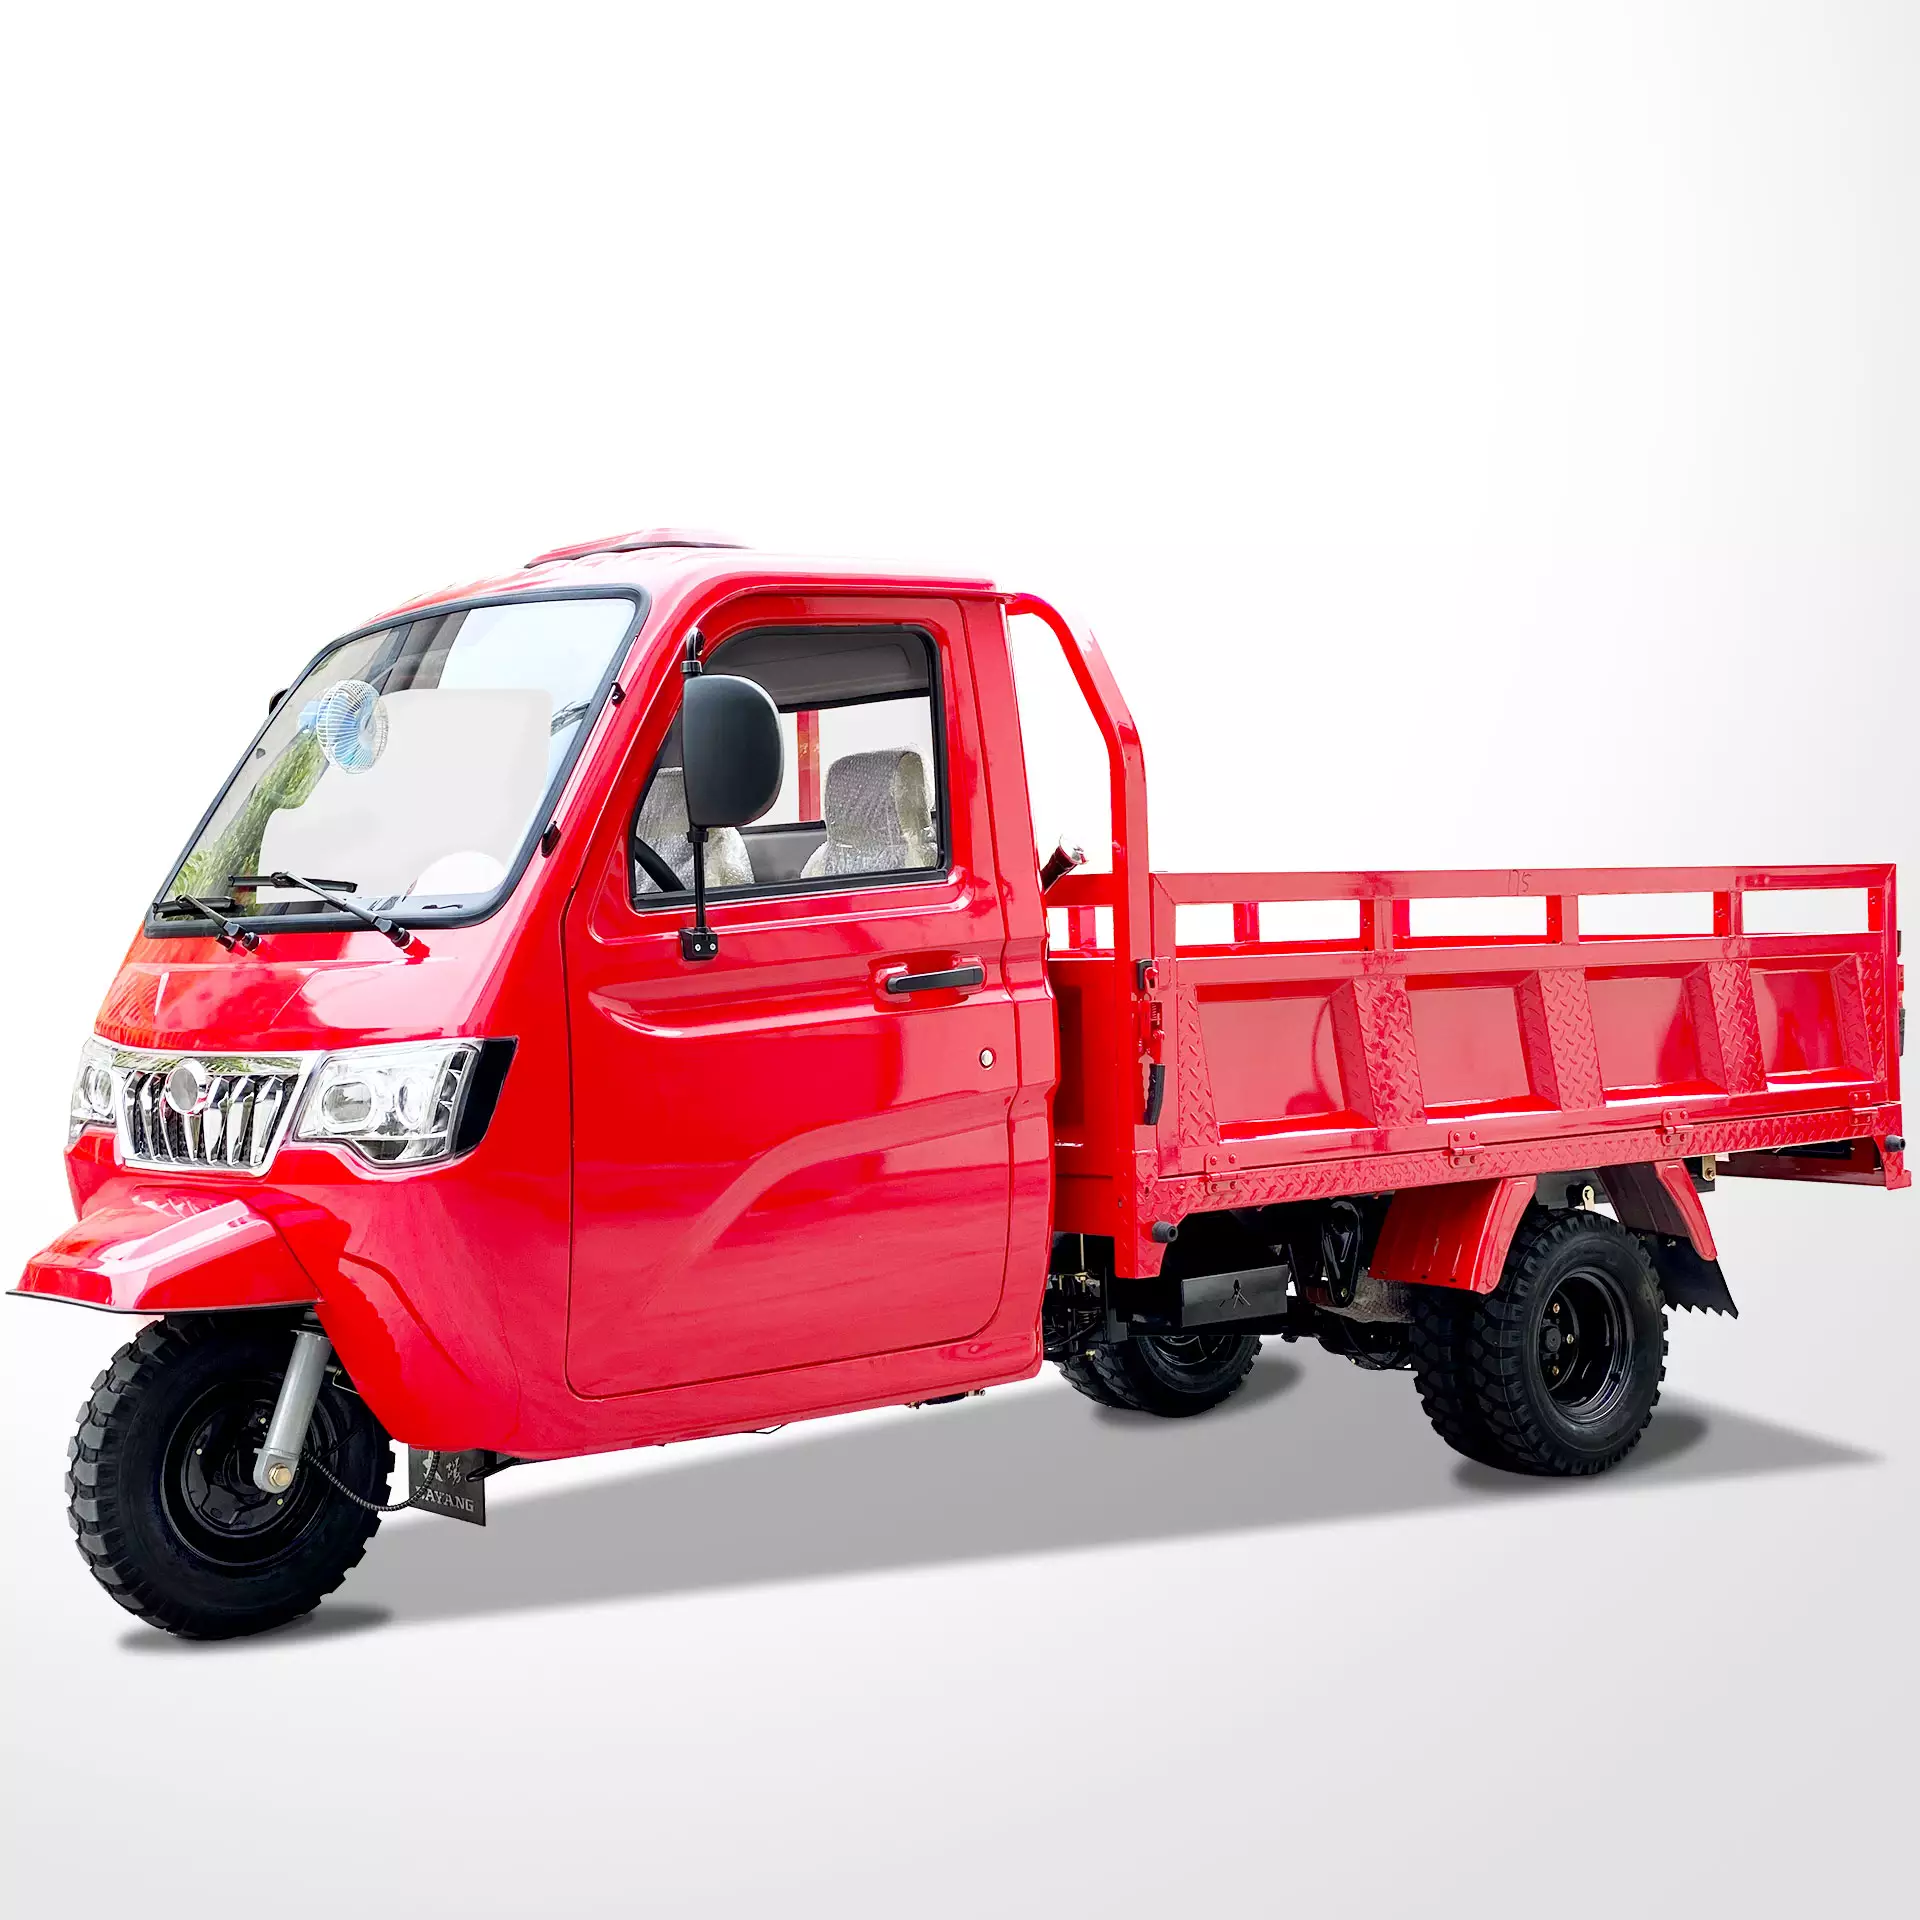 DAYANG high cost performance Enclosed cabin heavy loading tricycle with powerful engine and big cargo truck tricycle